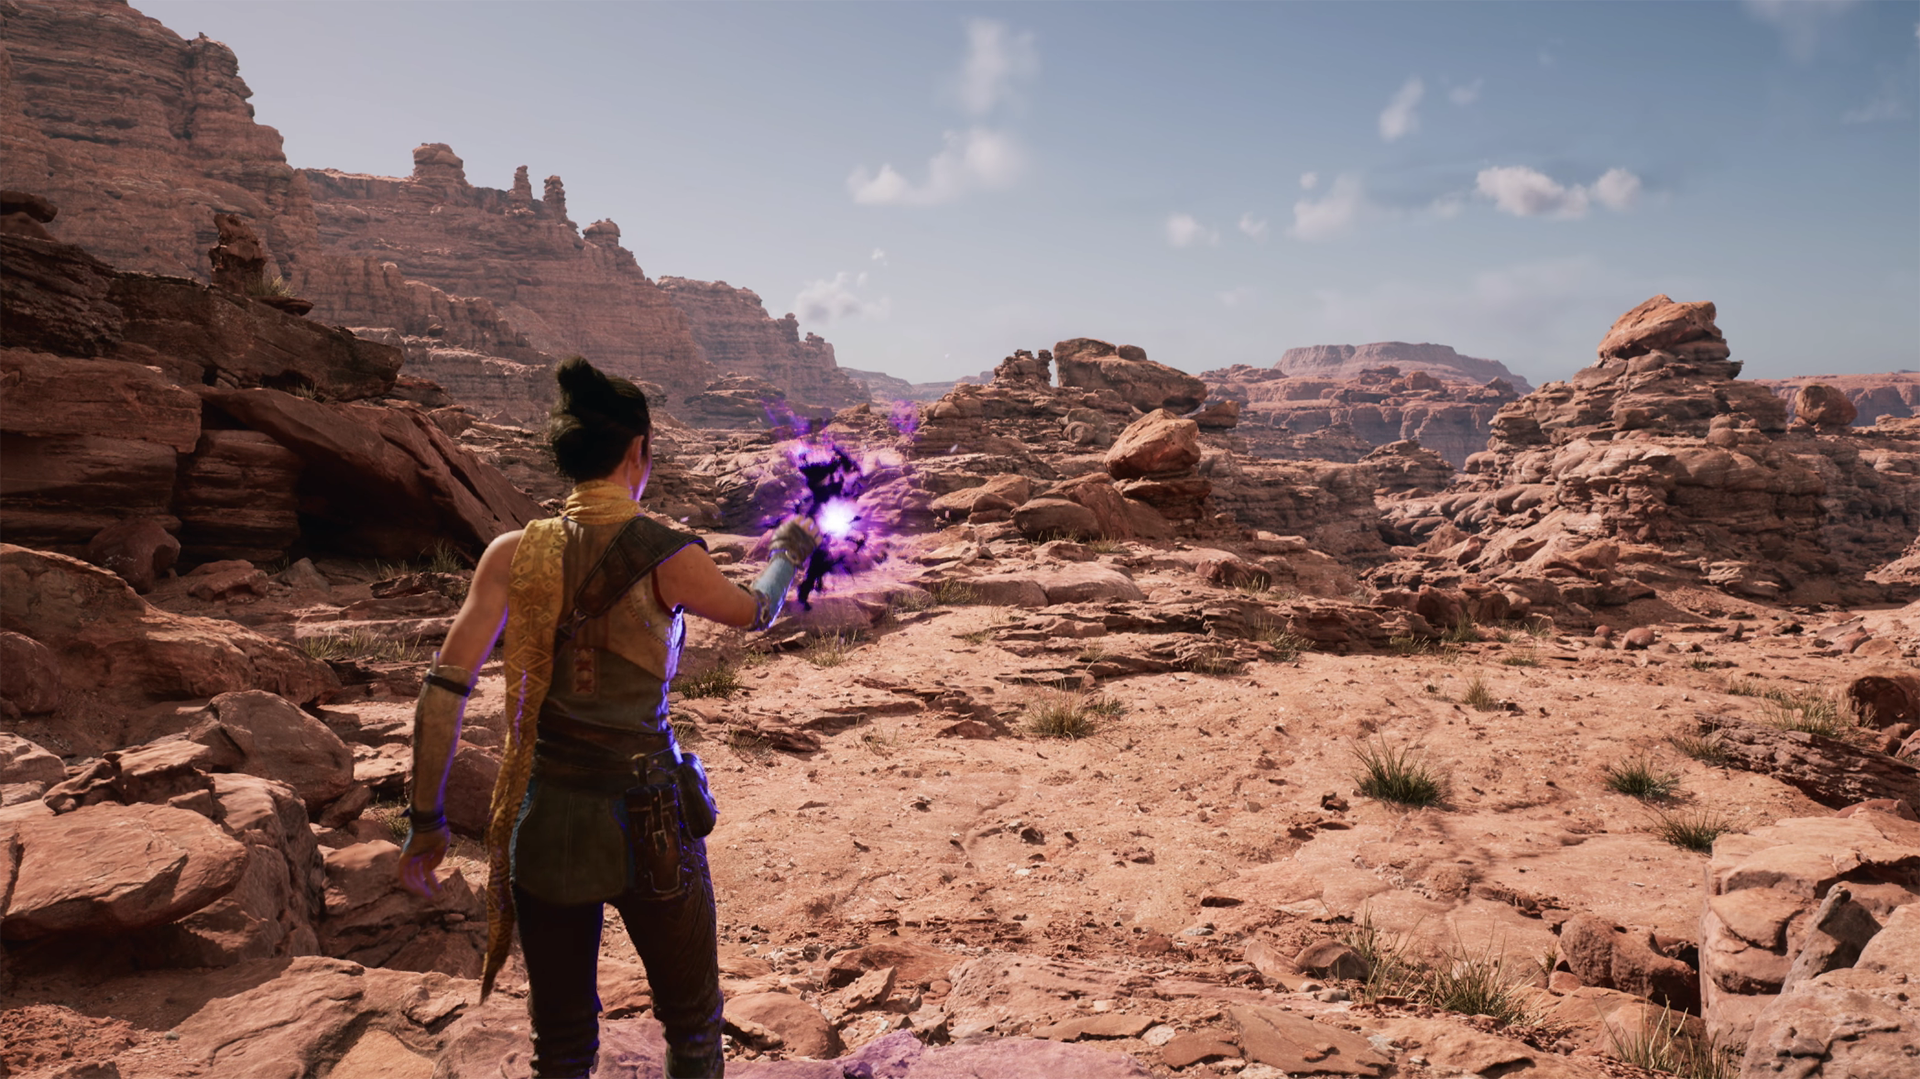 Screenshot from within Unreal Engine 5 of a character in front of a canyon landscape